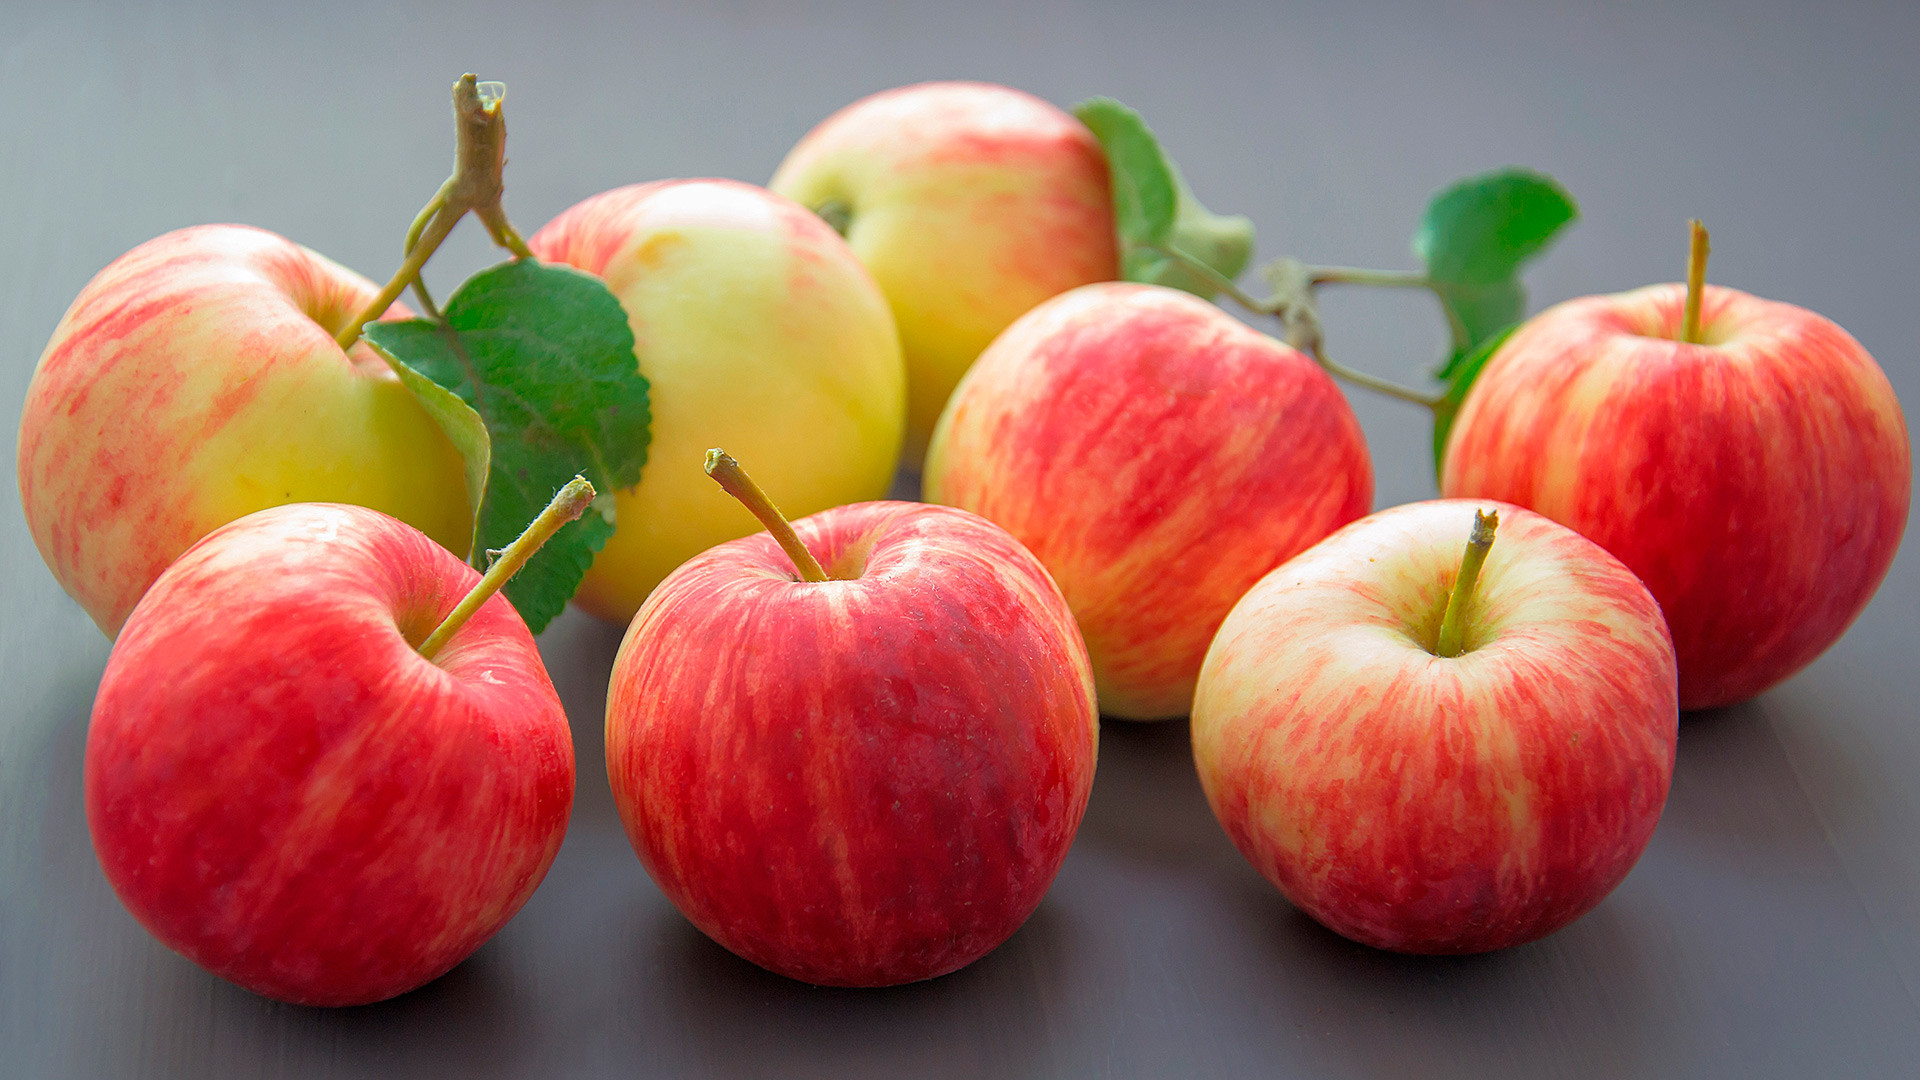 Apples Affect Diabetes and Blood Sugar Levels